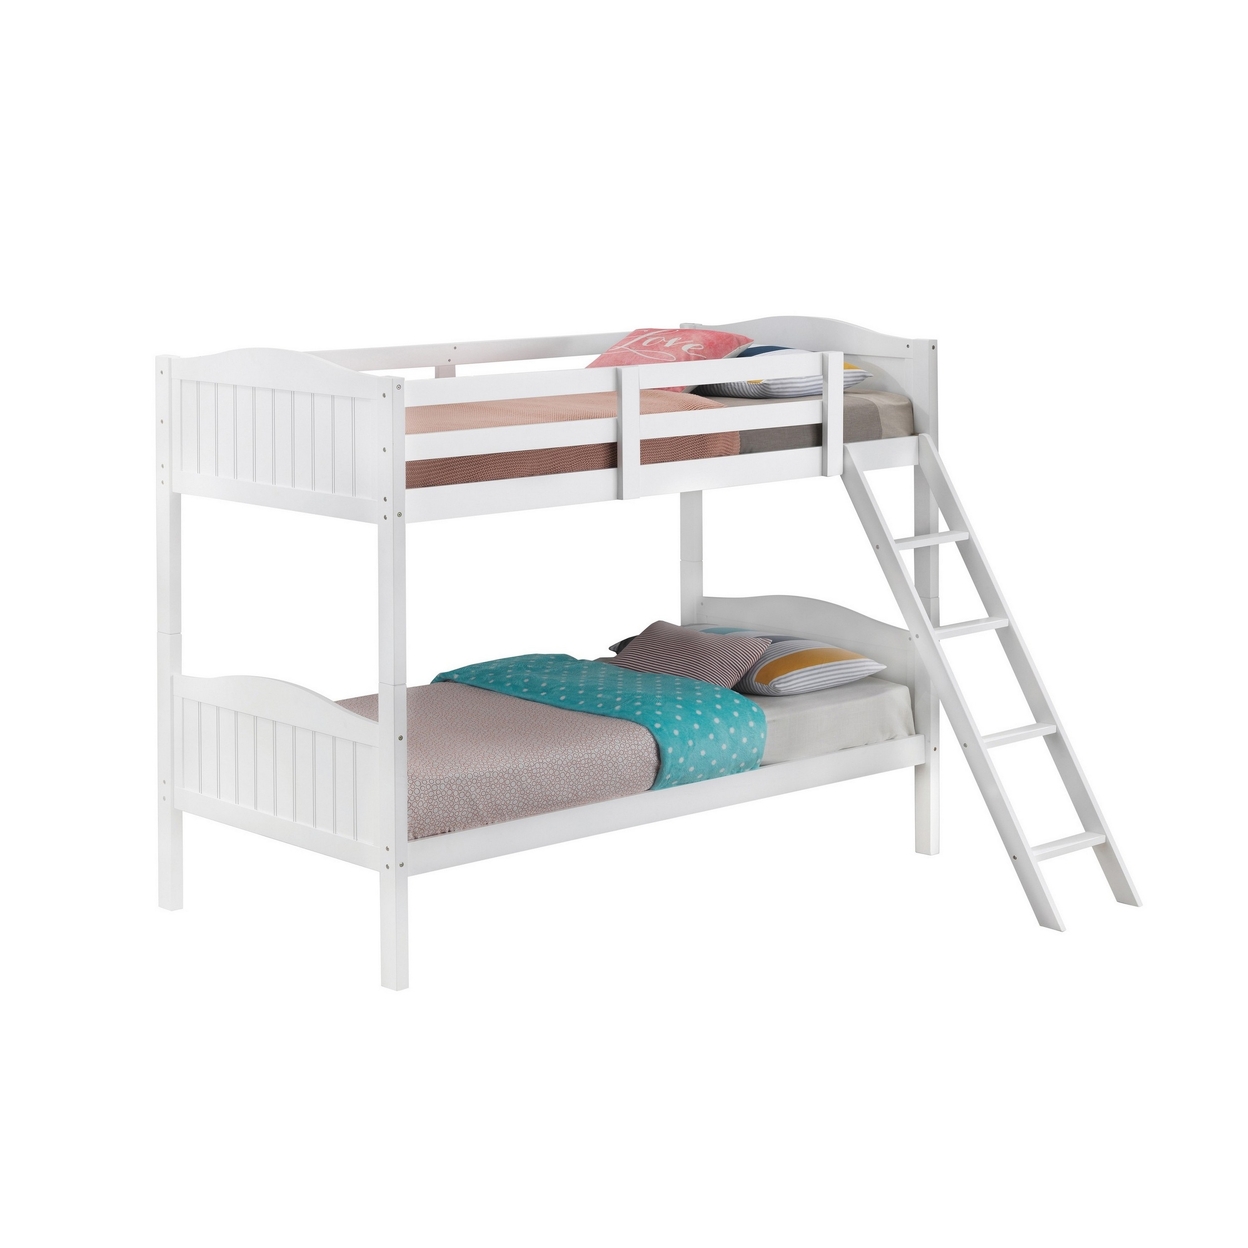 Mok Wood Twin Bunk Bed With Ladder And Guardrail, Farm Plank Style, White- Saltoro Sherpi